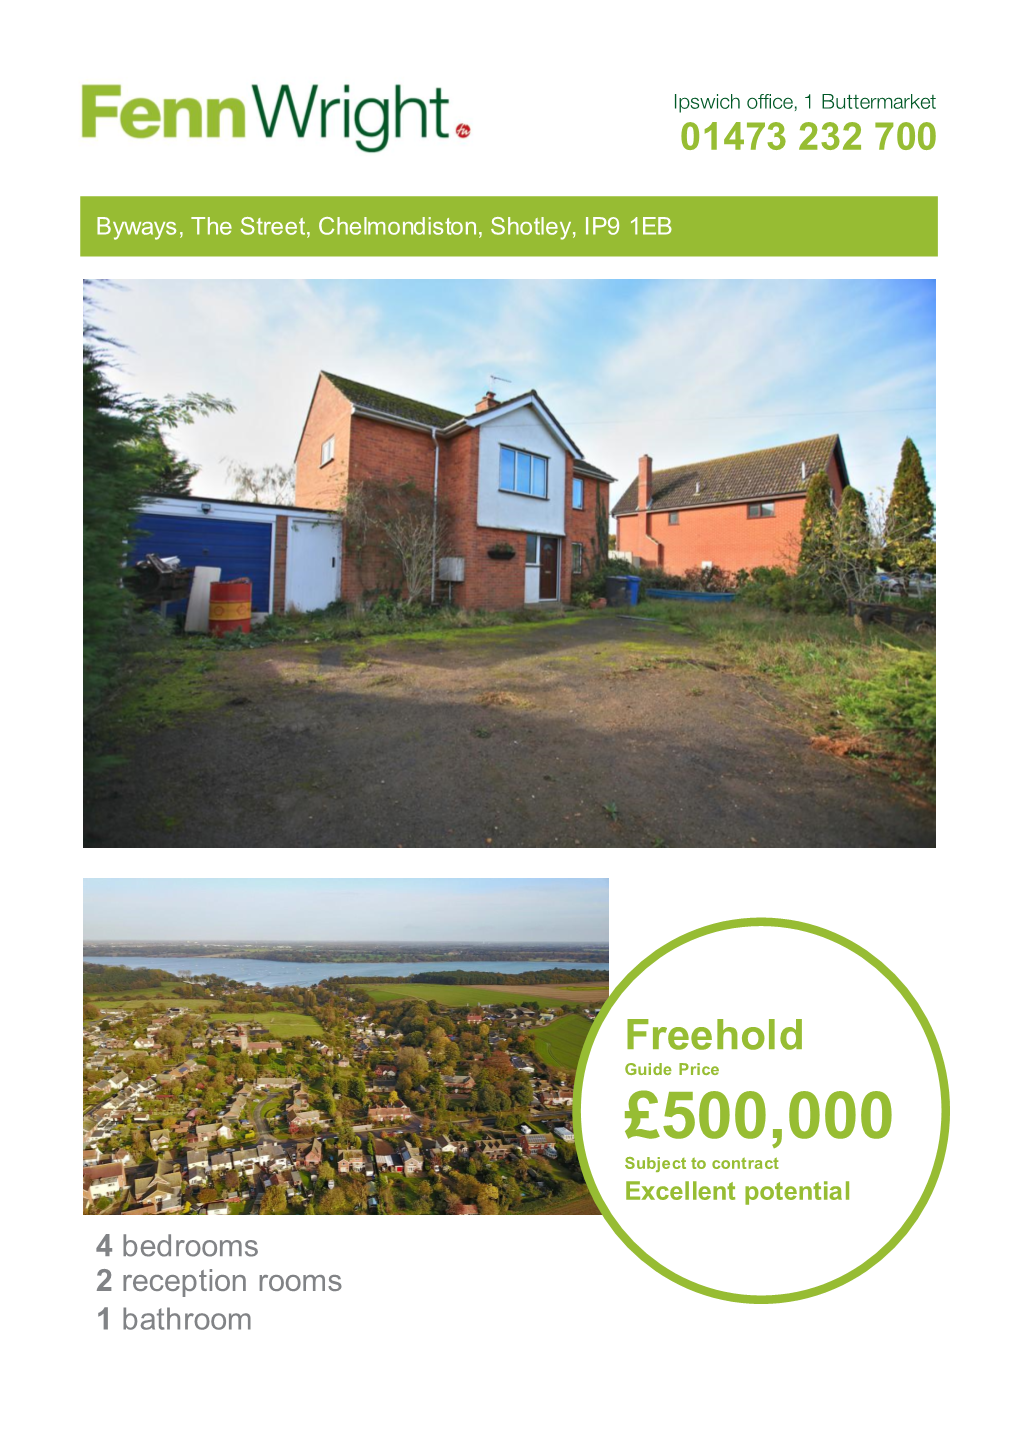 £500,000 Subject to Contract Excellent Potential 4 Bedrooms 2 Reception Rooms 1 Bathroom